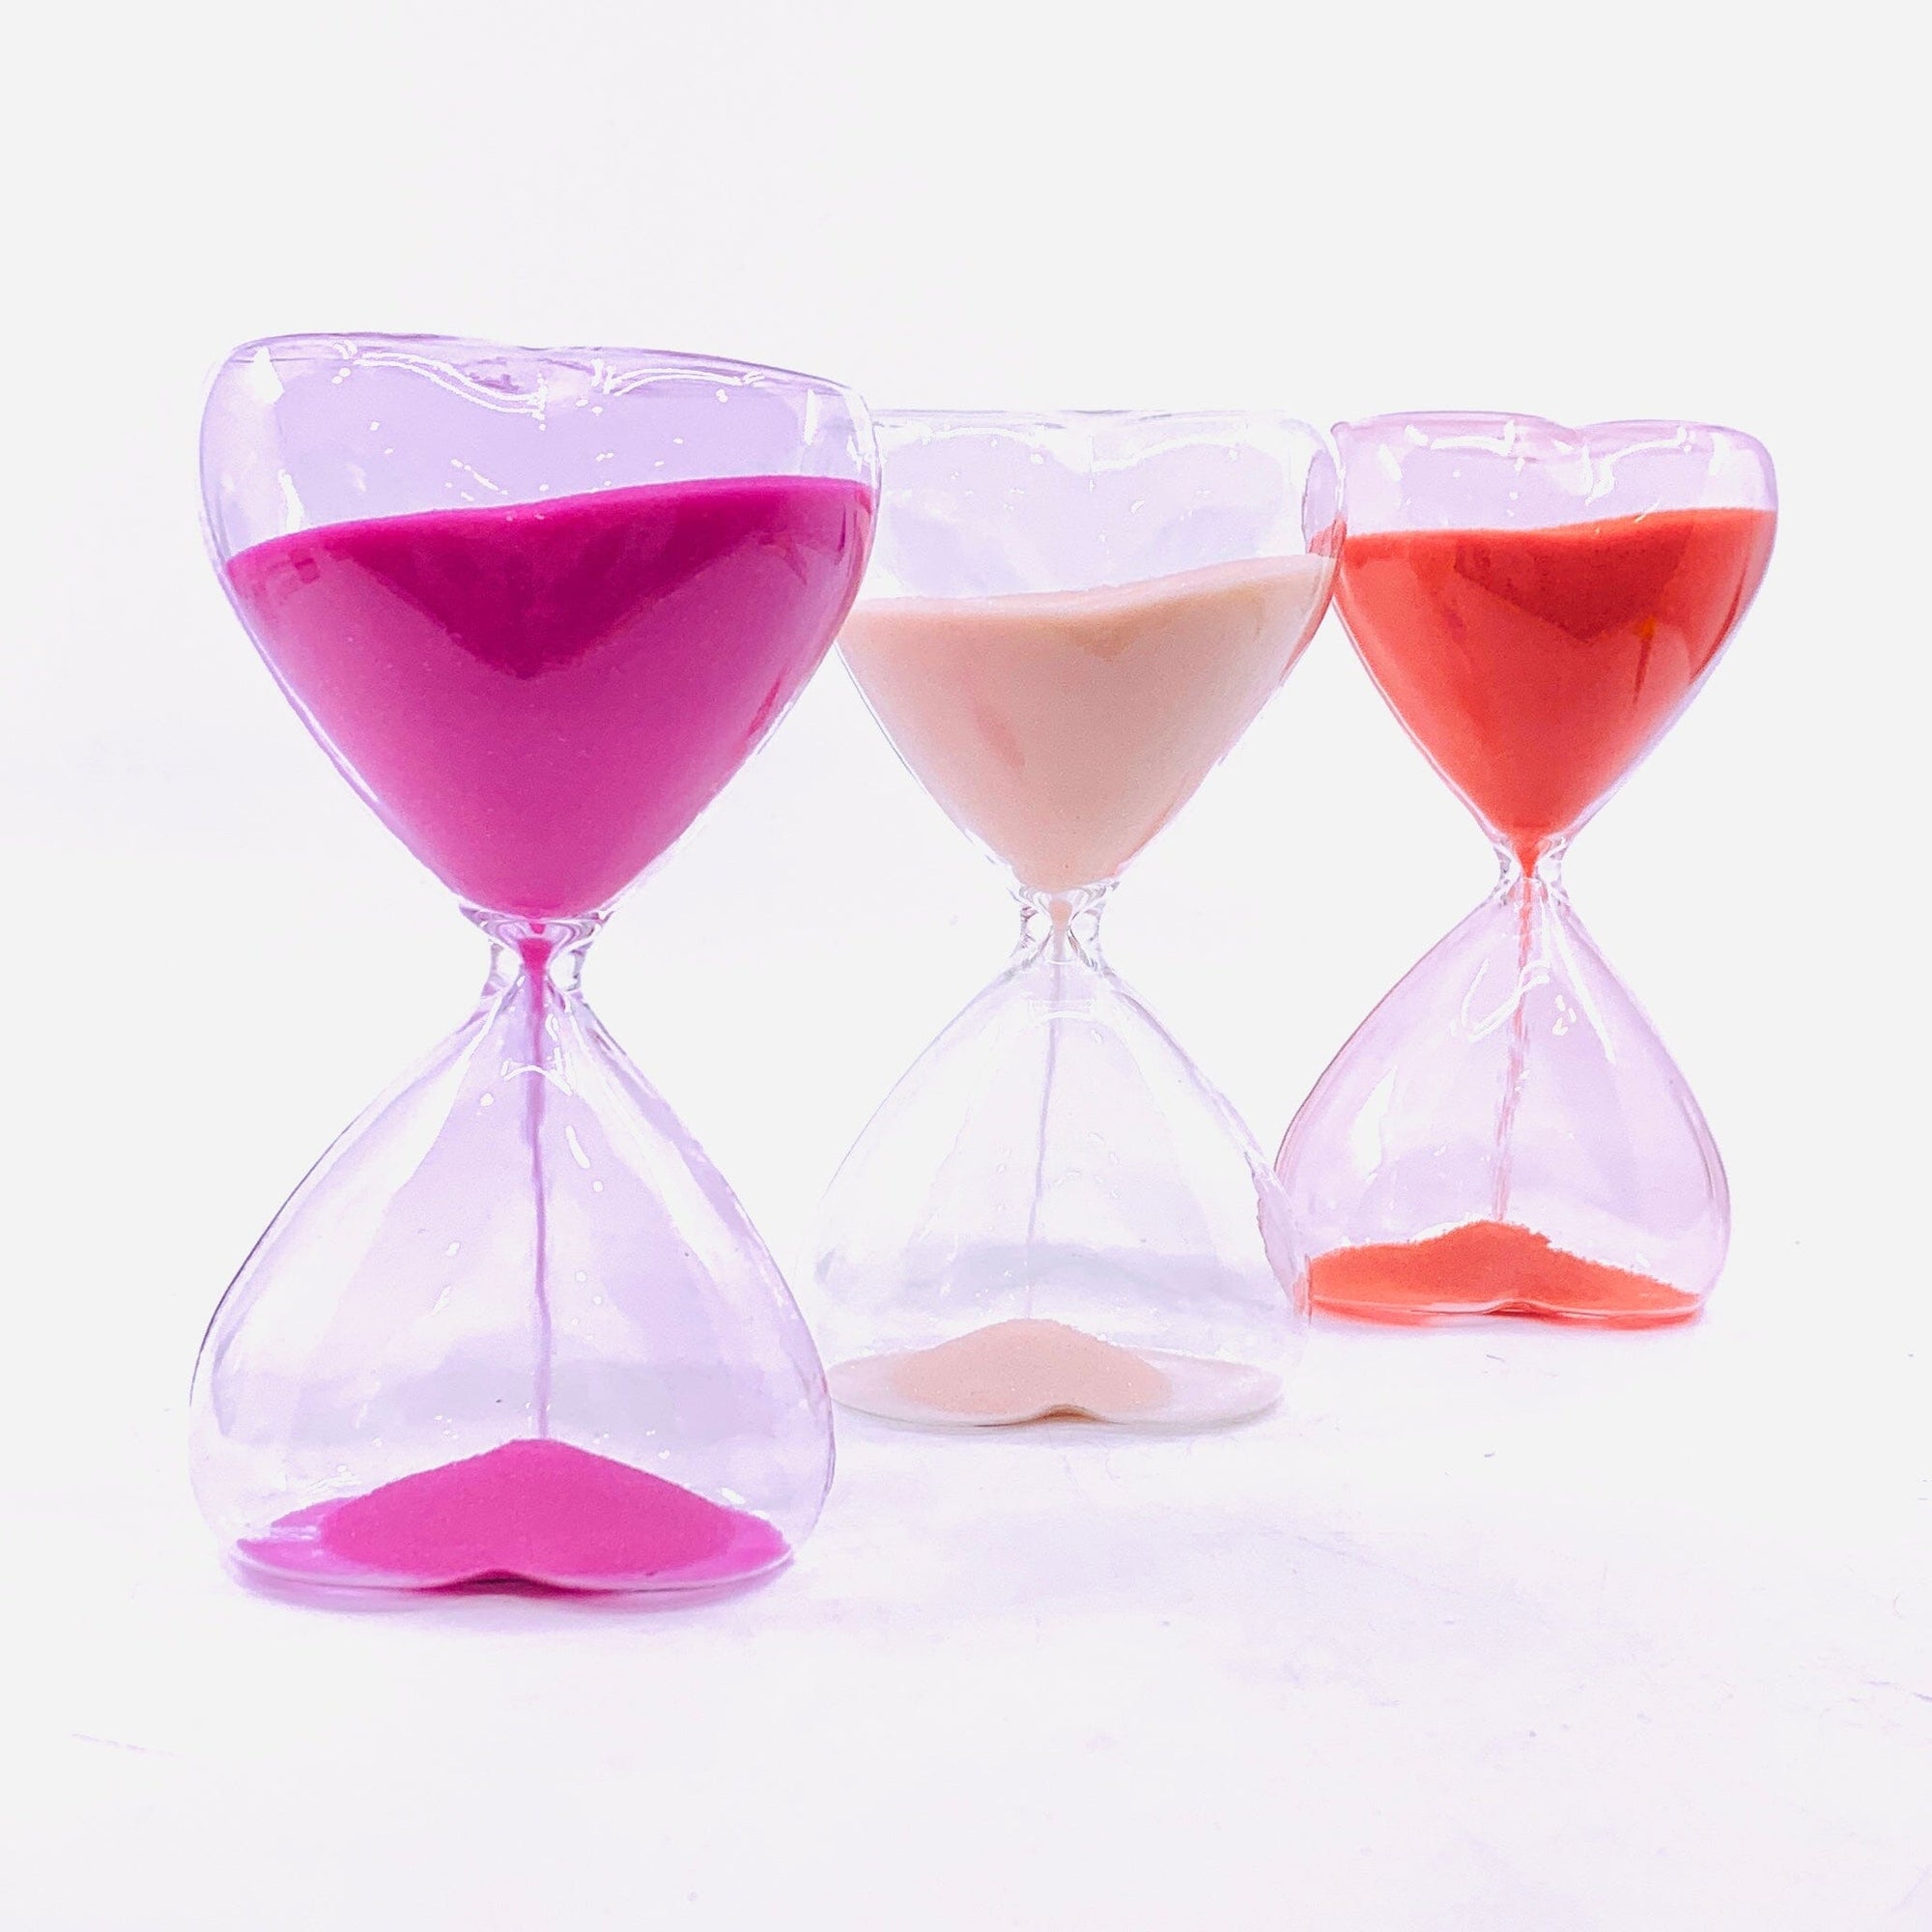 Time For Love - Valentines Heart Hour Glass, Hot Pink Decor One Hundred 80 Degrees 